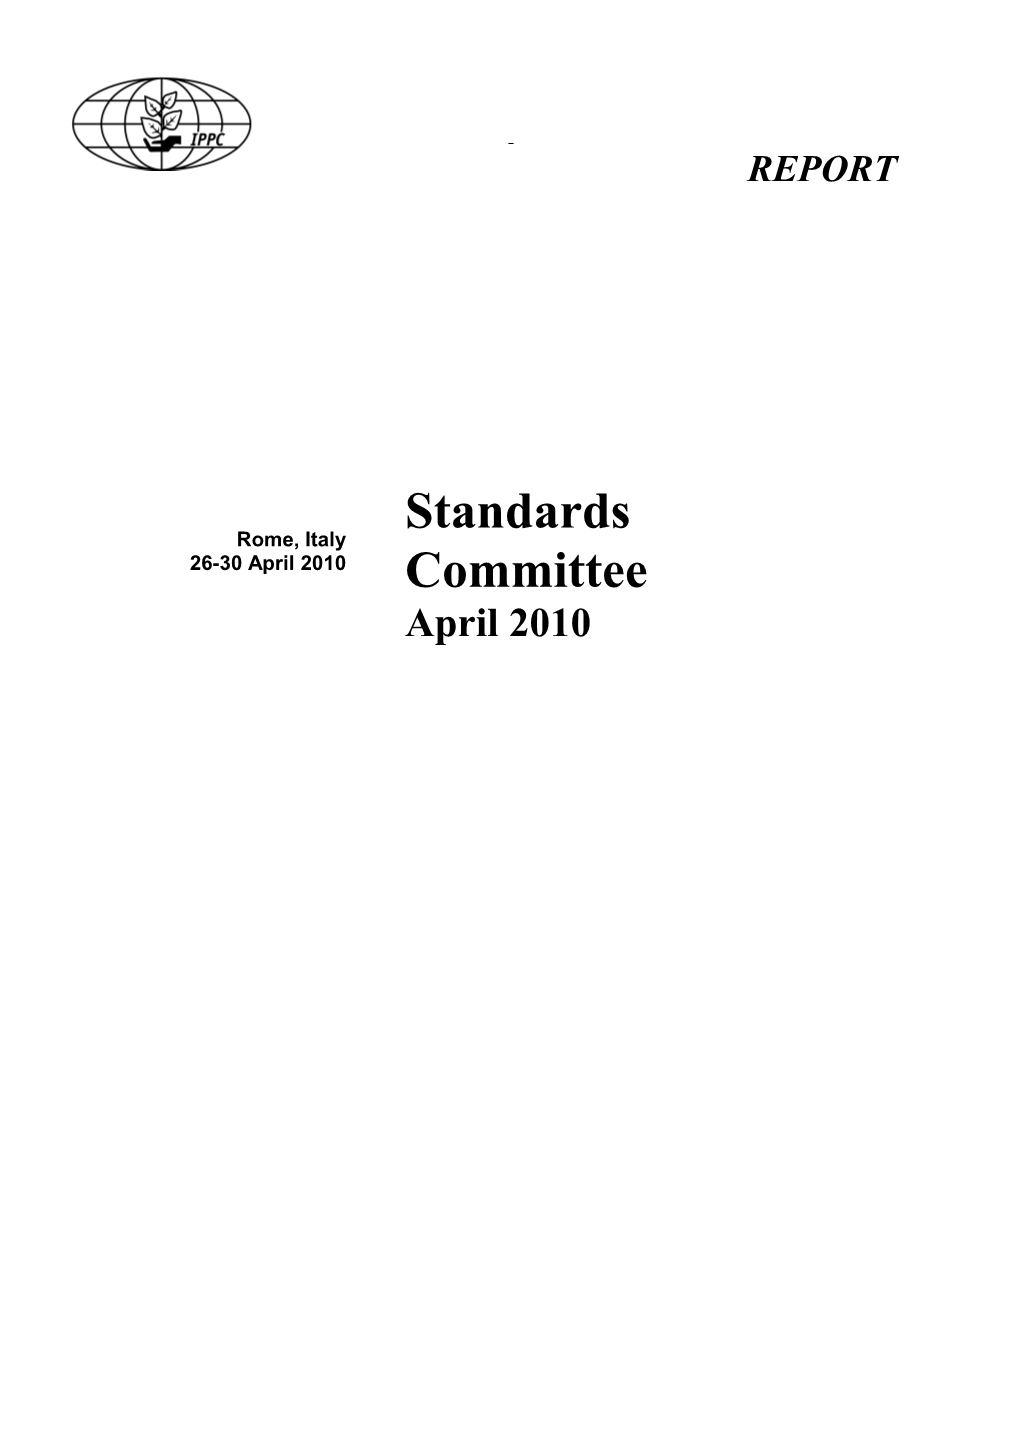 Report of the Standards Committee Part 1, Monday Morning